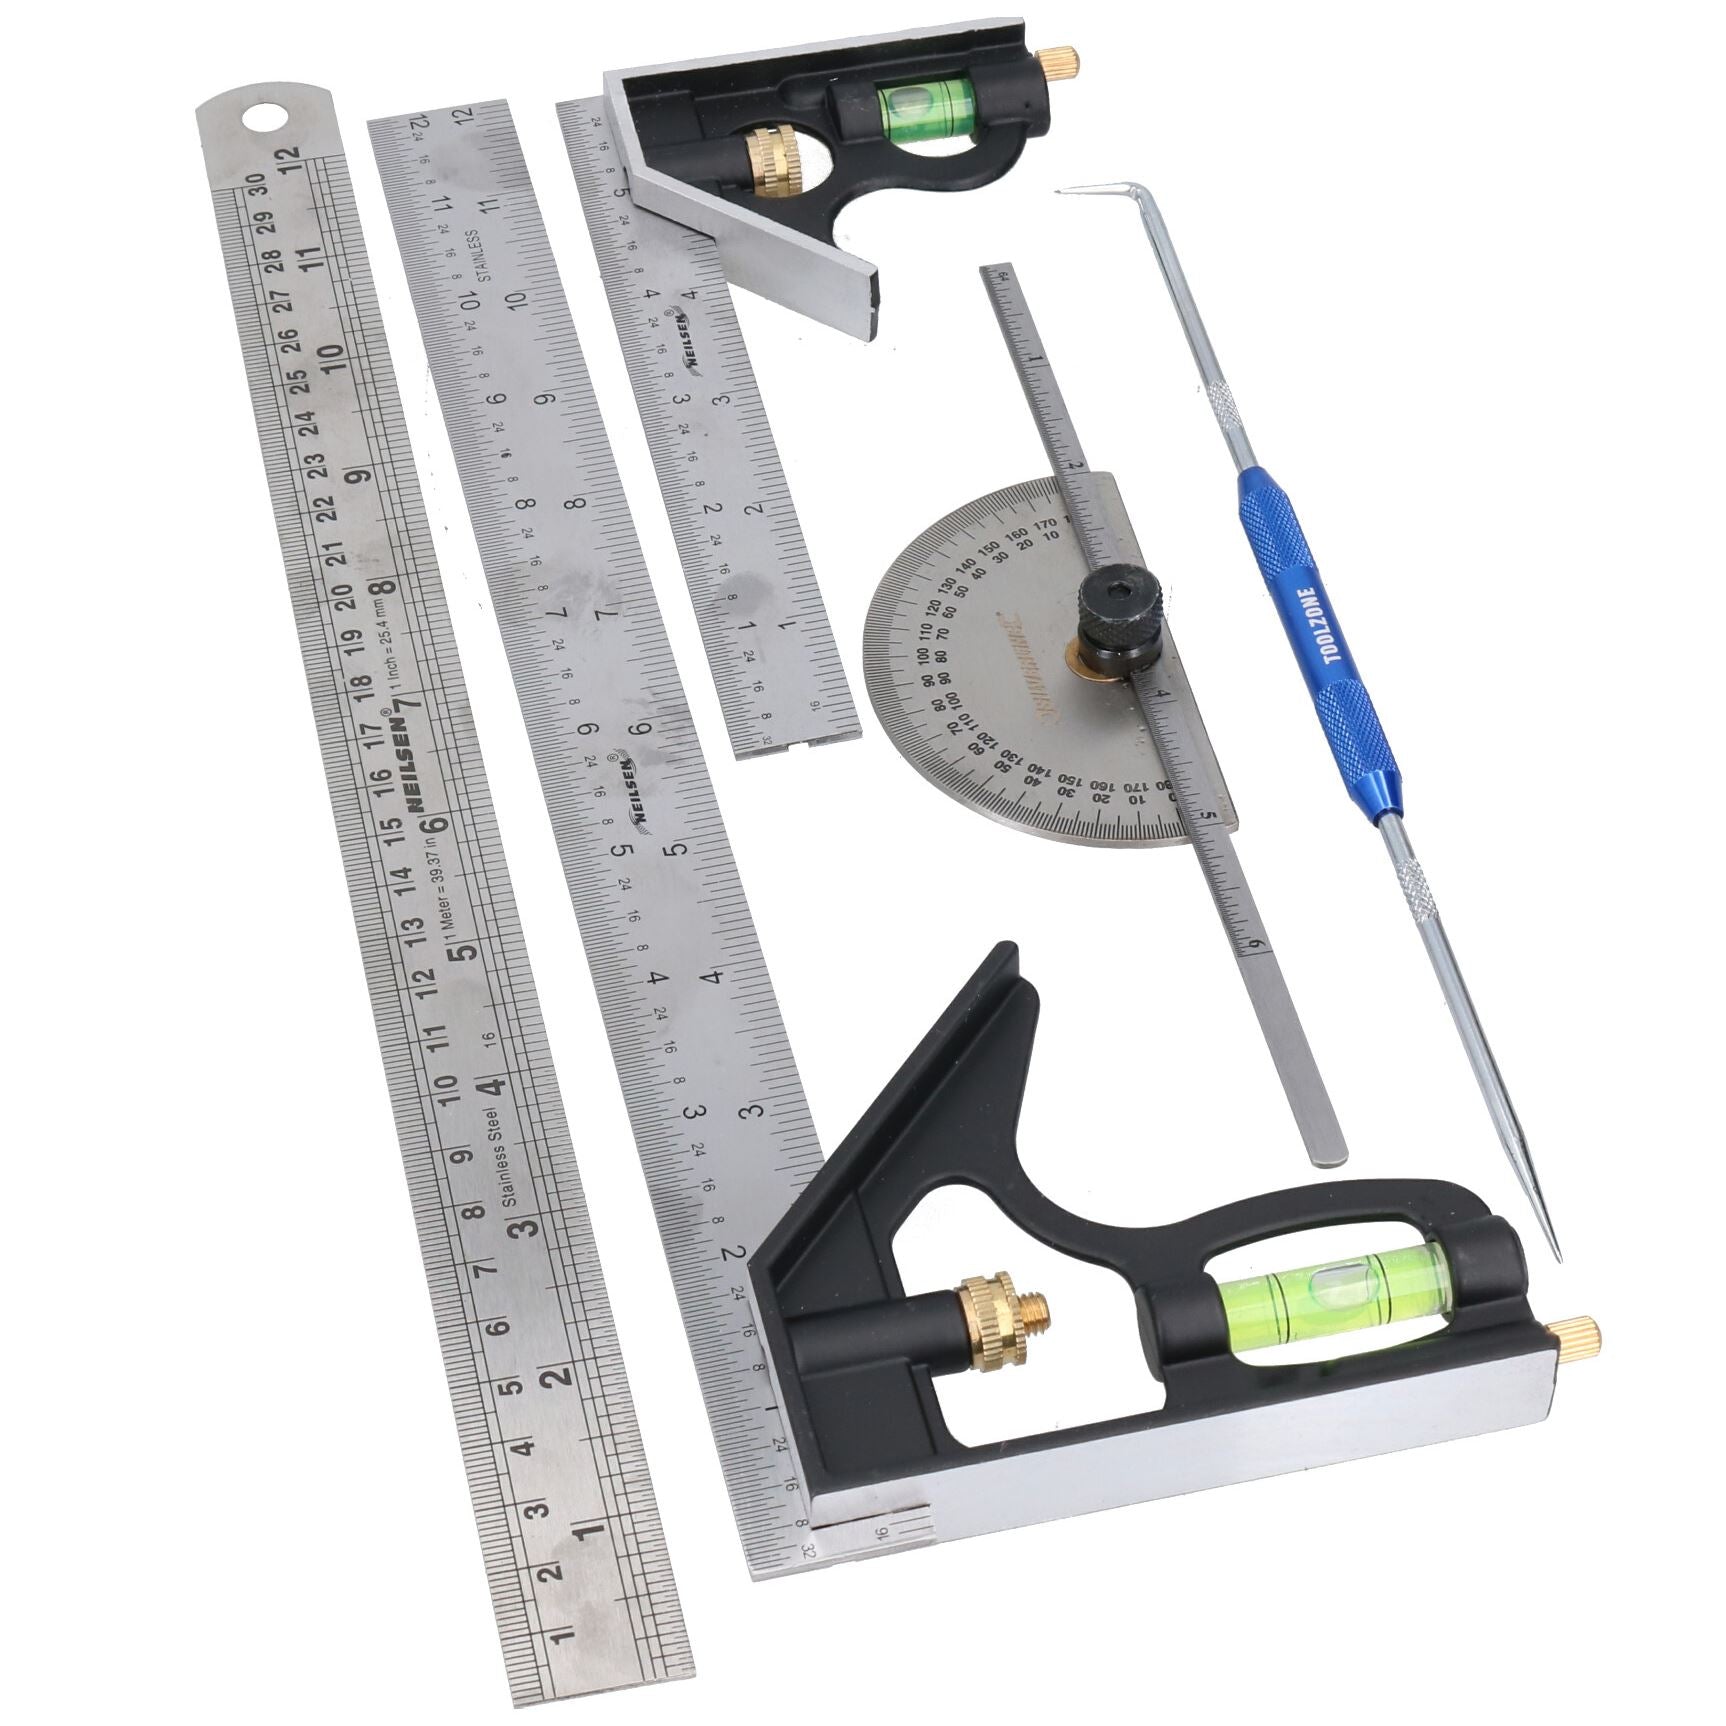 Marking Layout Measurement Engineers Kit Ruler Scriber Set Square Protractor 5pc